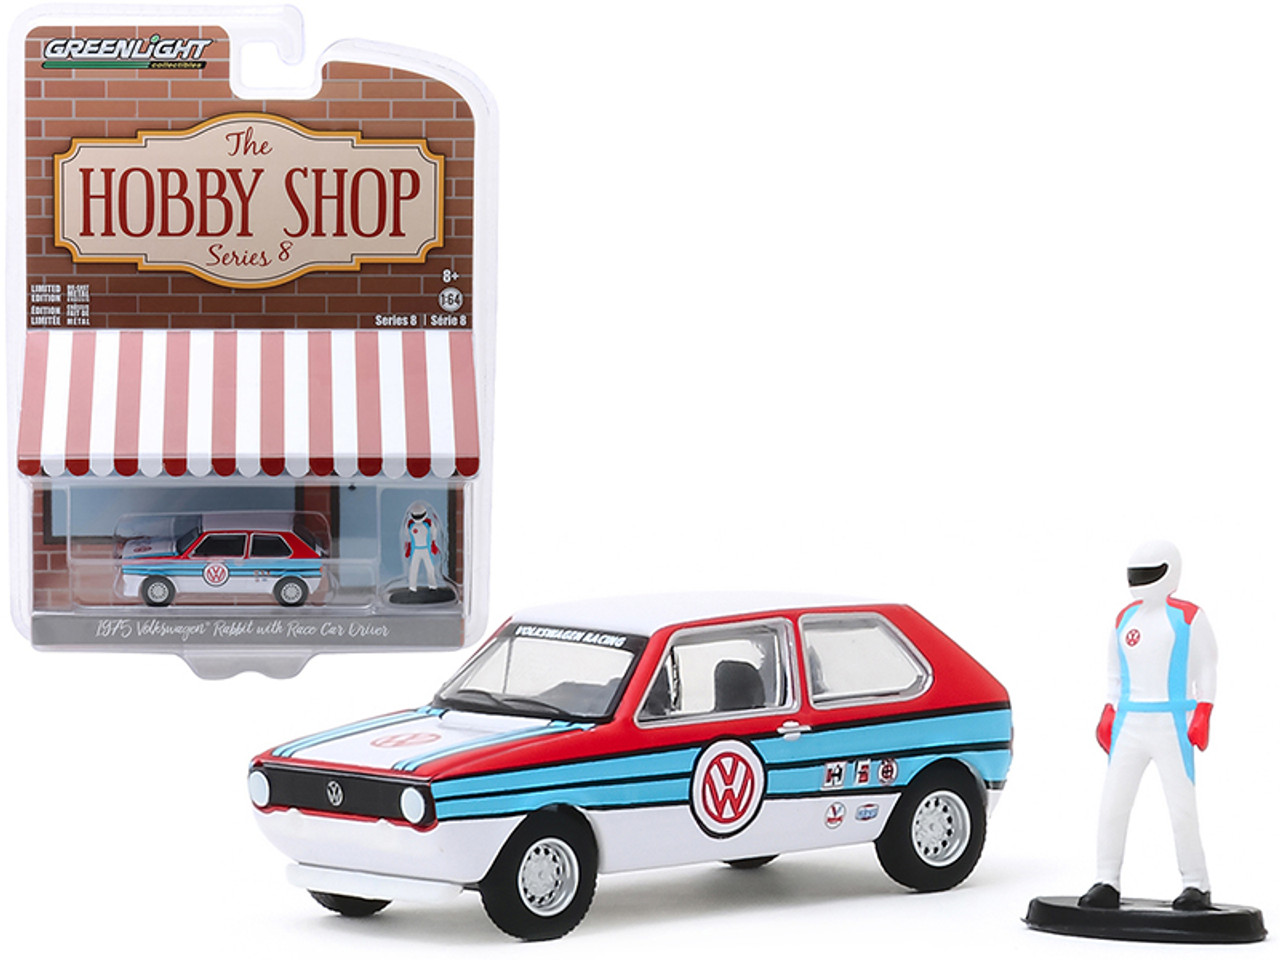 1975 Volkswagen Rabbit White with Stripes and Race Car Driver Figurine "The Hobby Shop" Series 8 1/64 Diecast Model Car by Greenlight